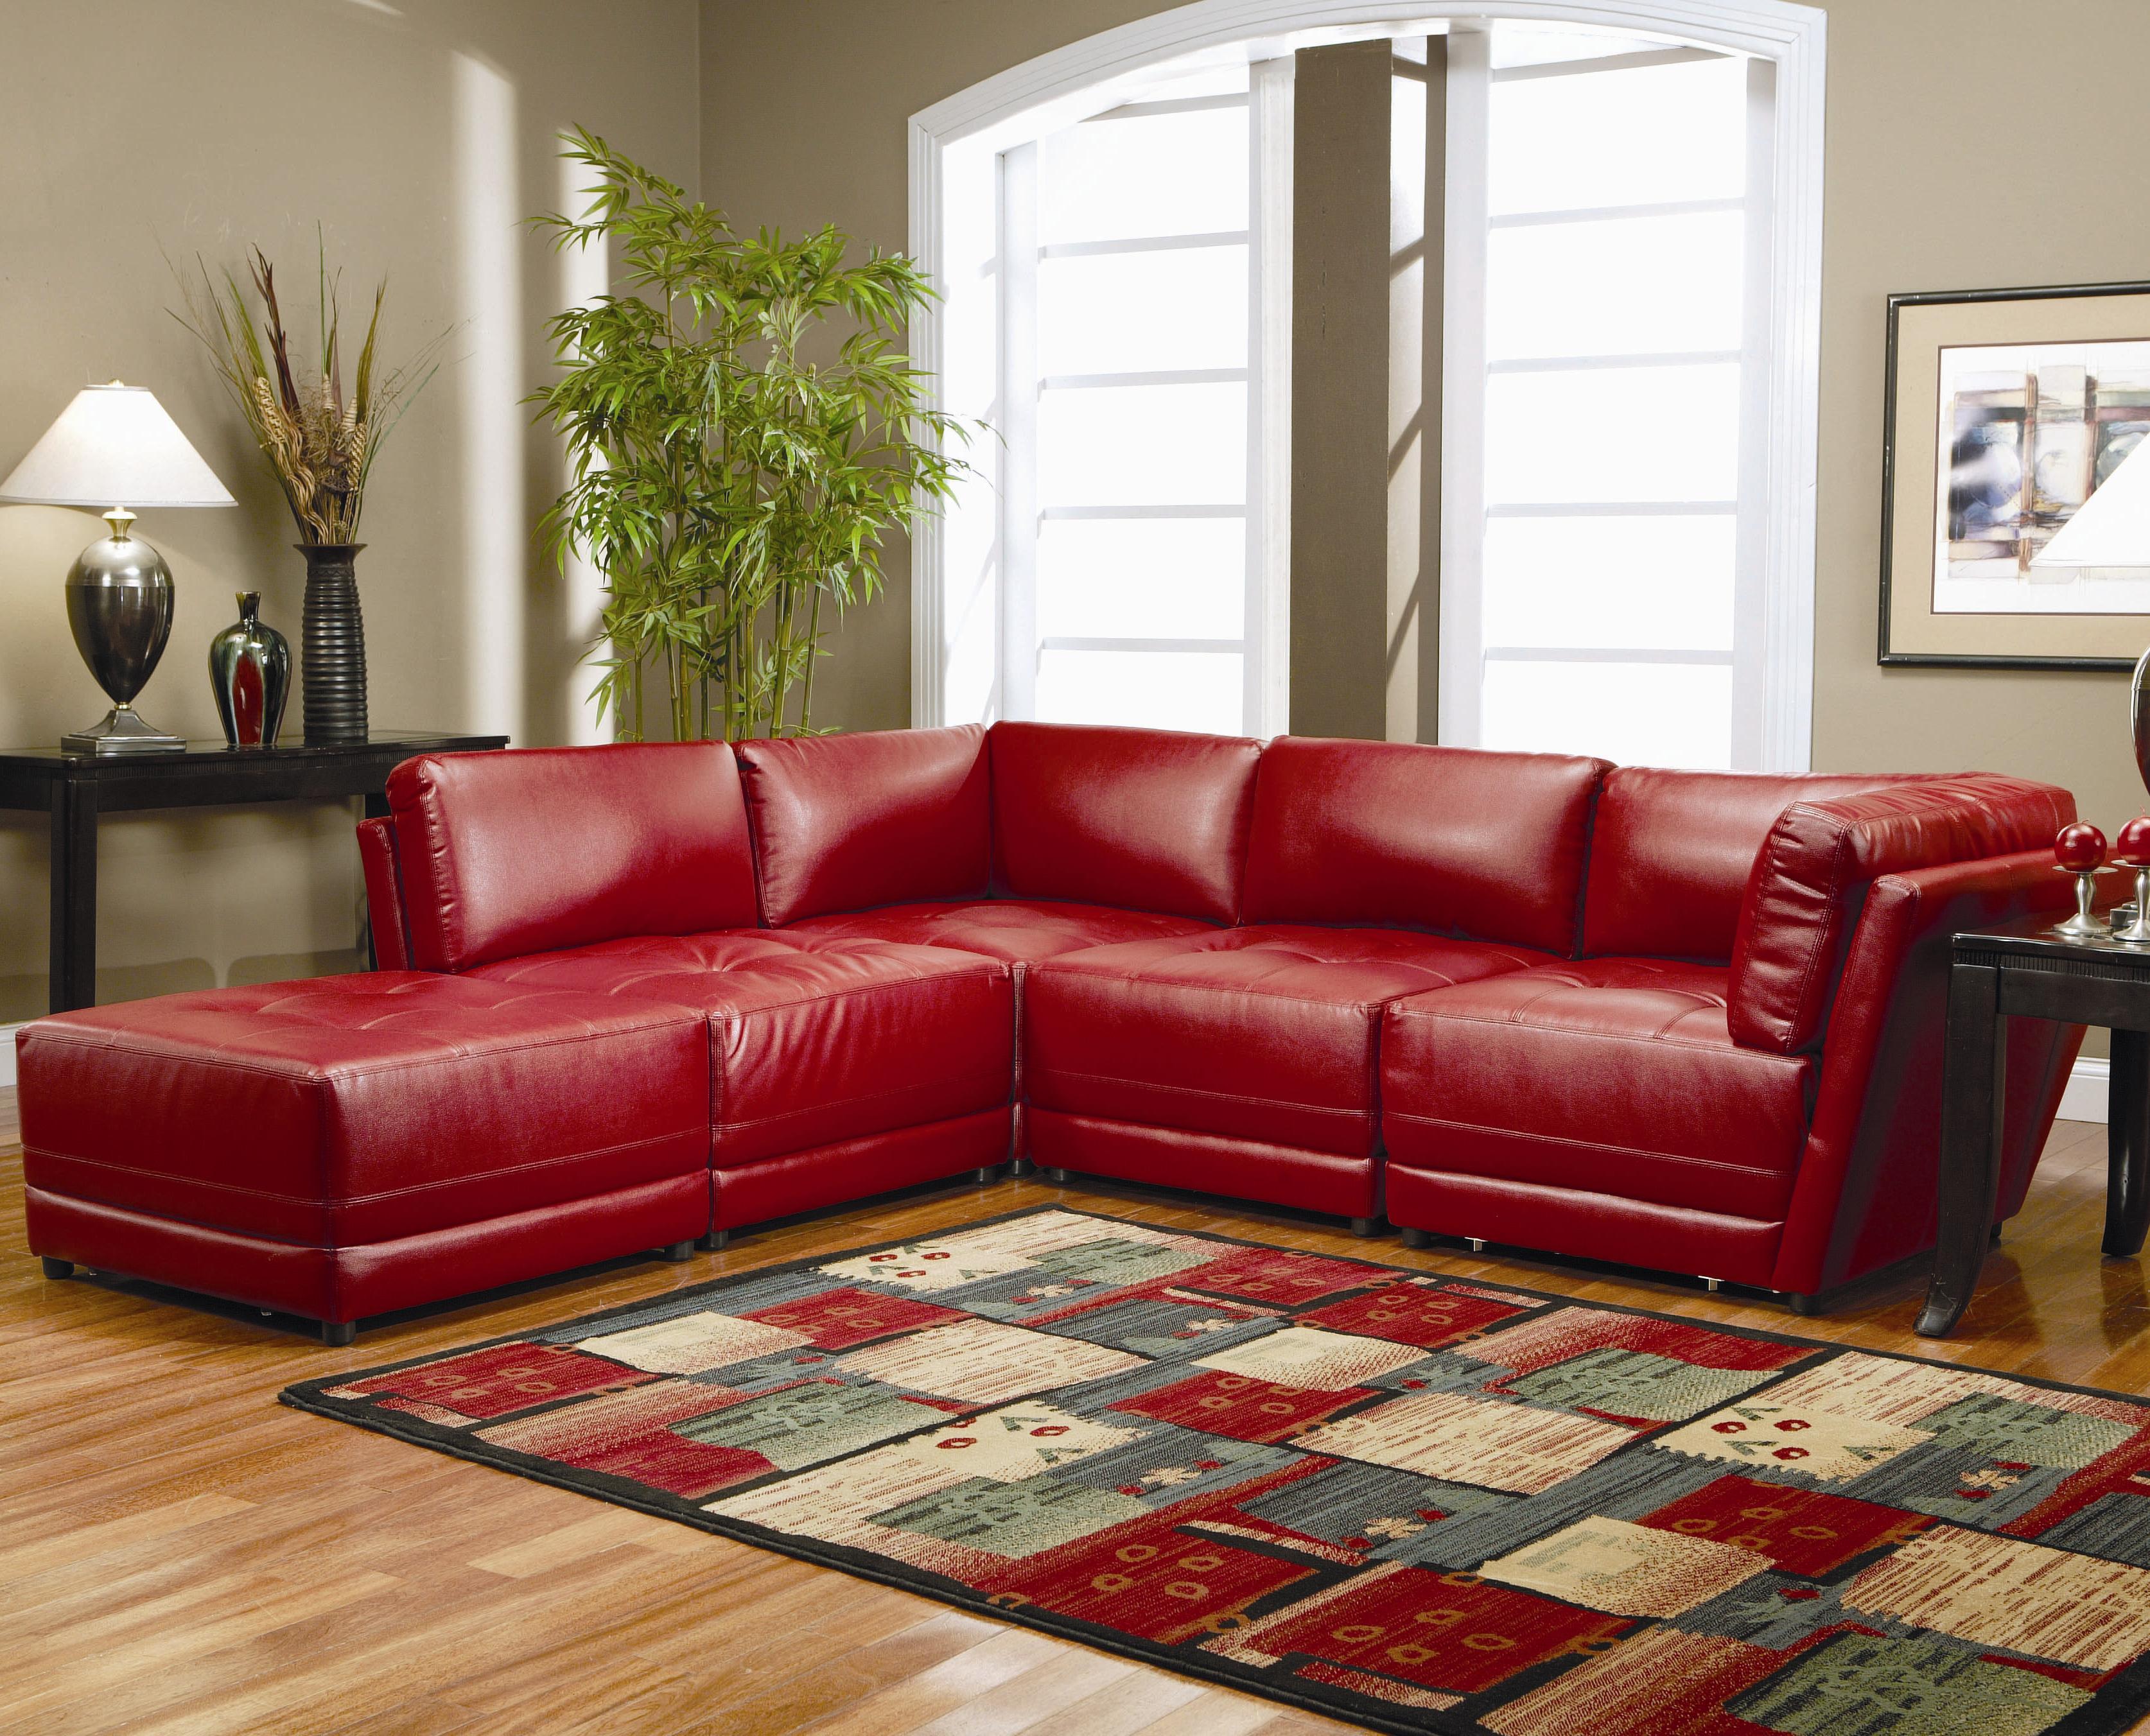 red ikea modern living room ideas decorating